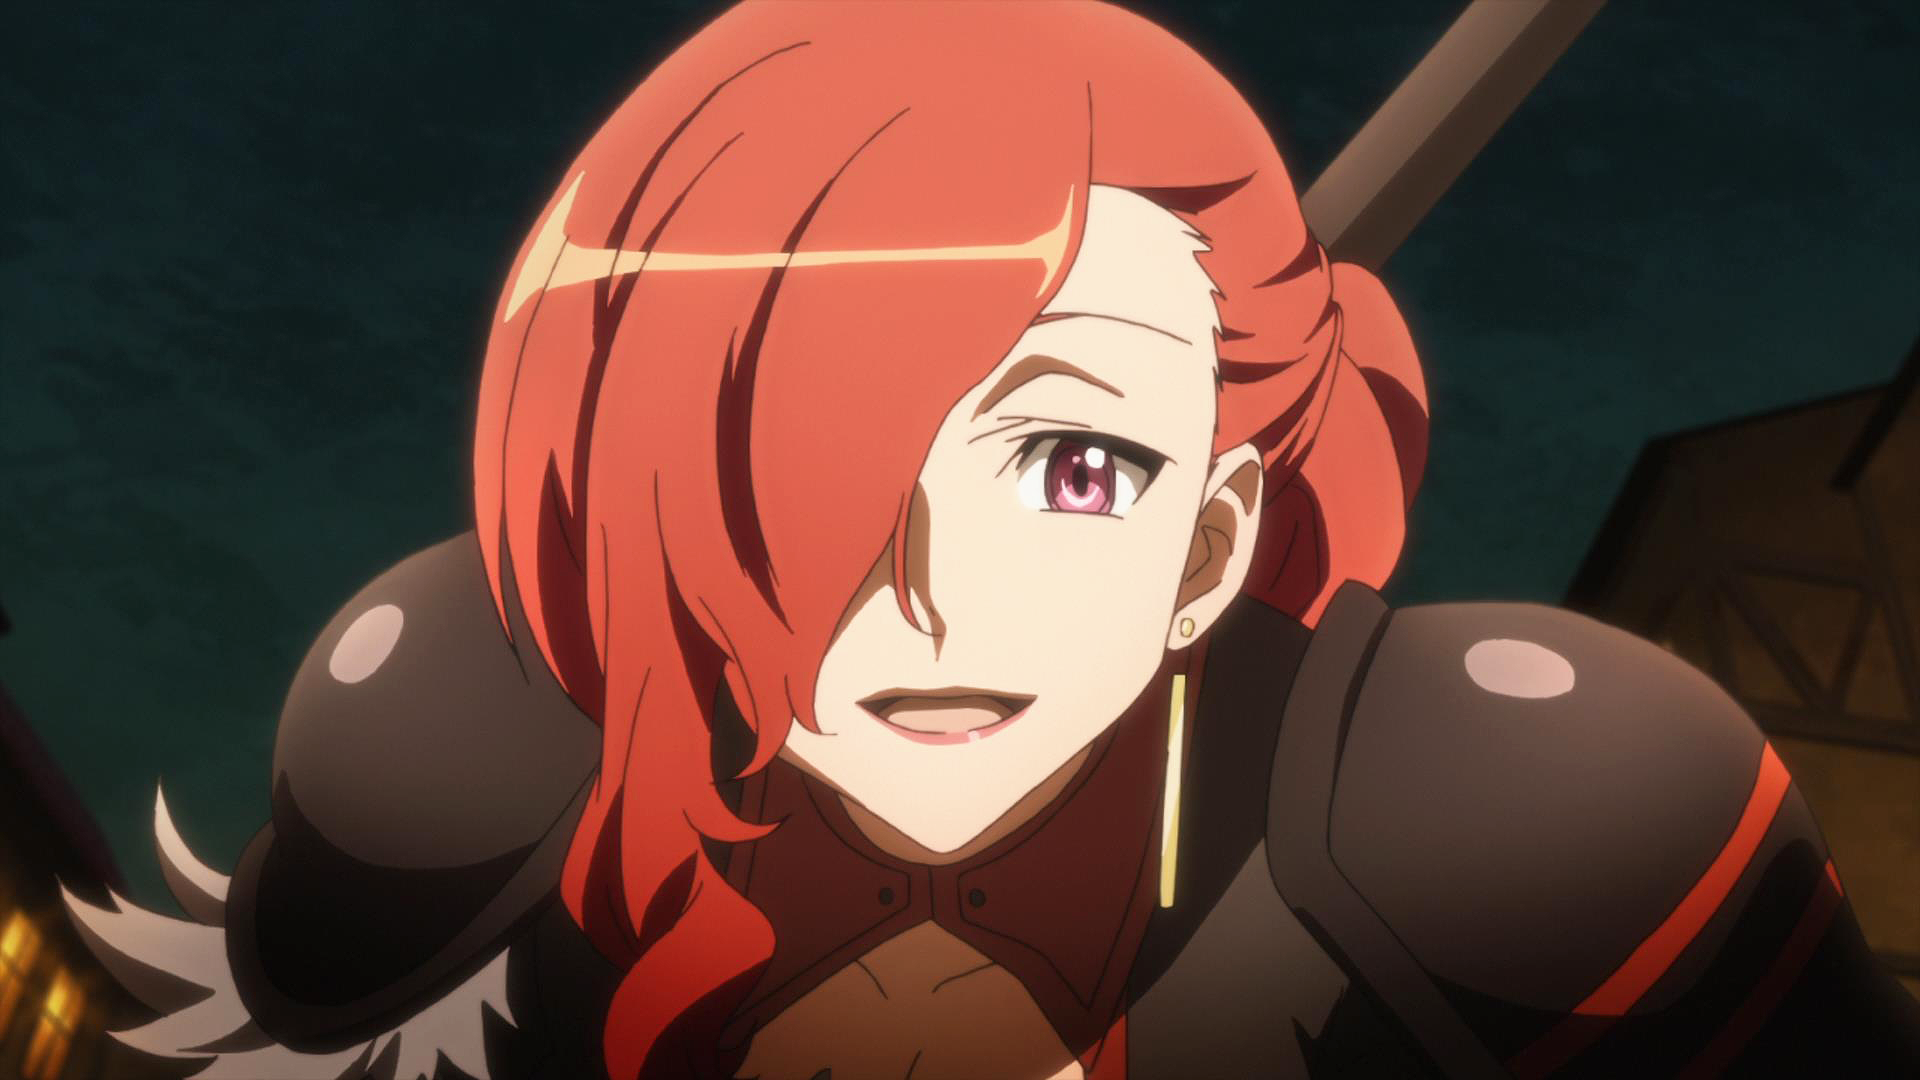 Image S01ep04 Rosalia Gloating Over Pinas Death Png Sword Art Online Wiki Fandom Powered